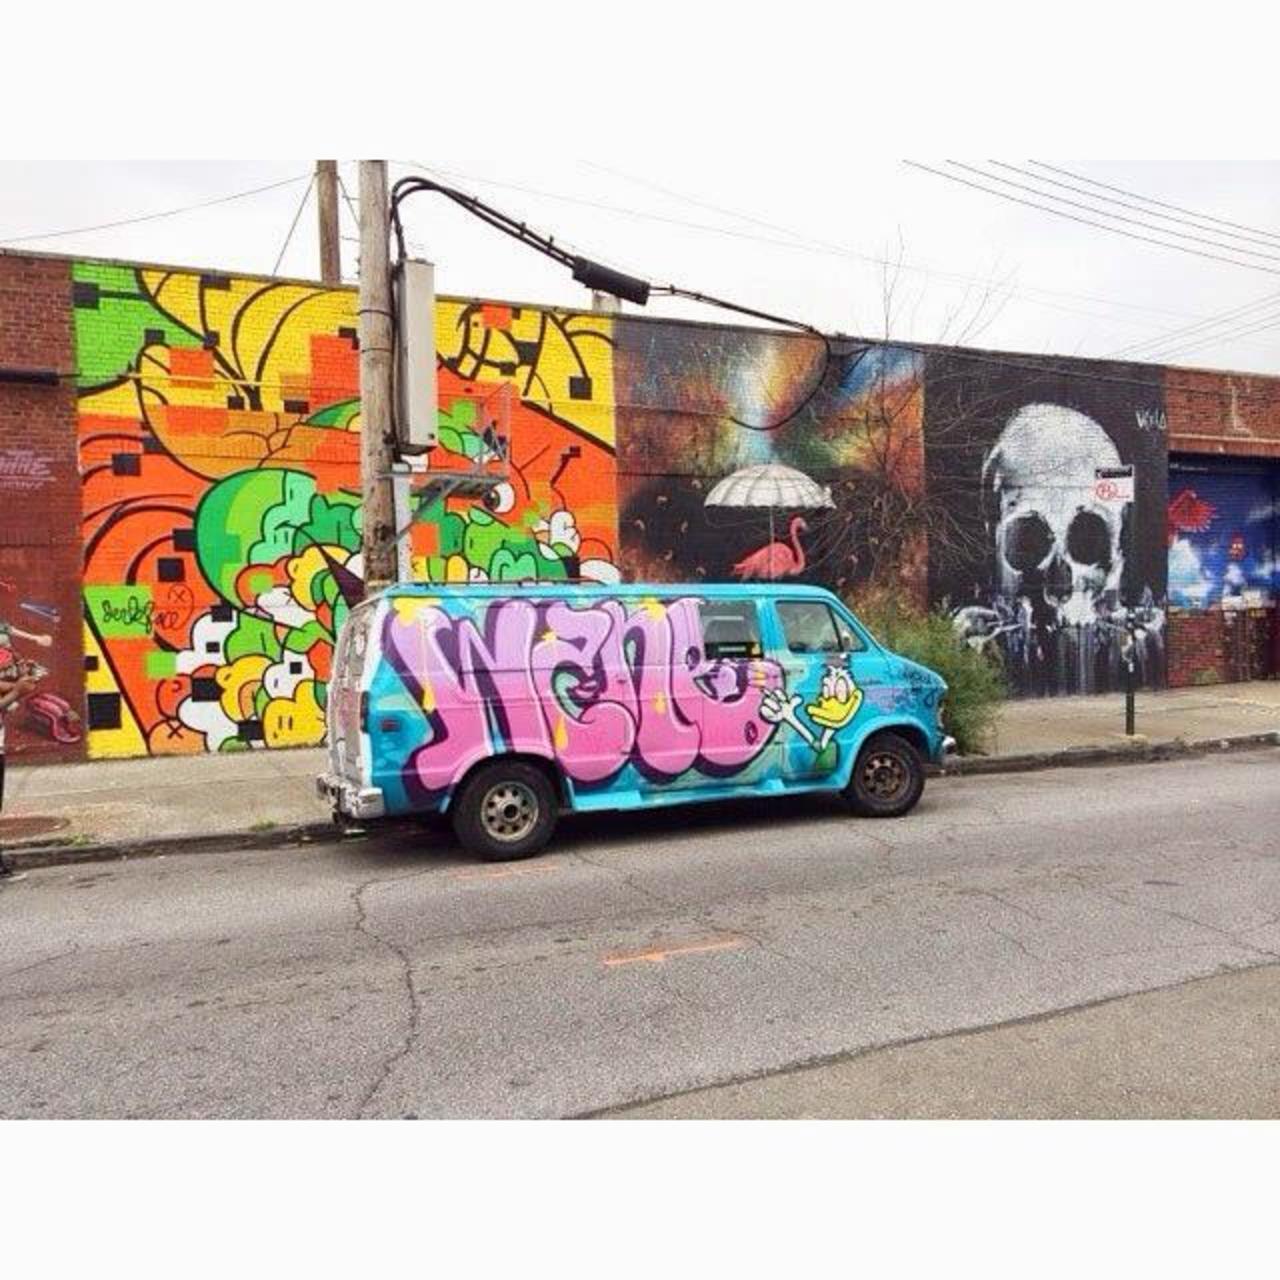 I saw this van in #brooklyn . Does anyone know of the #artist ? #streetart #graffiti http://t.co/66N6ZQiPZS